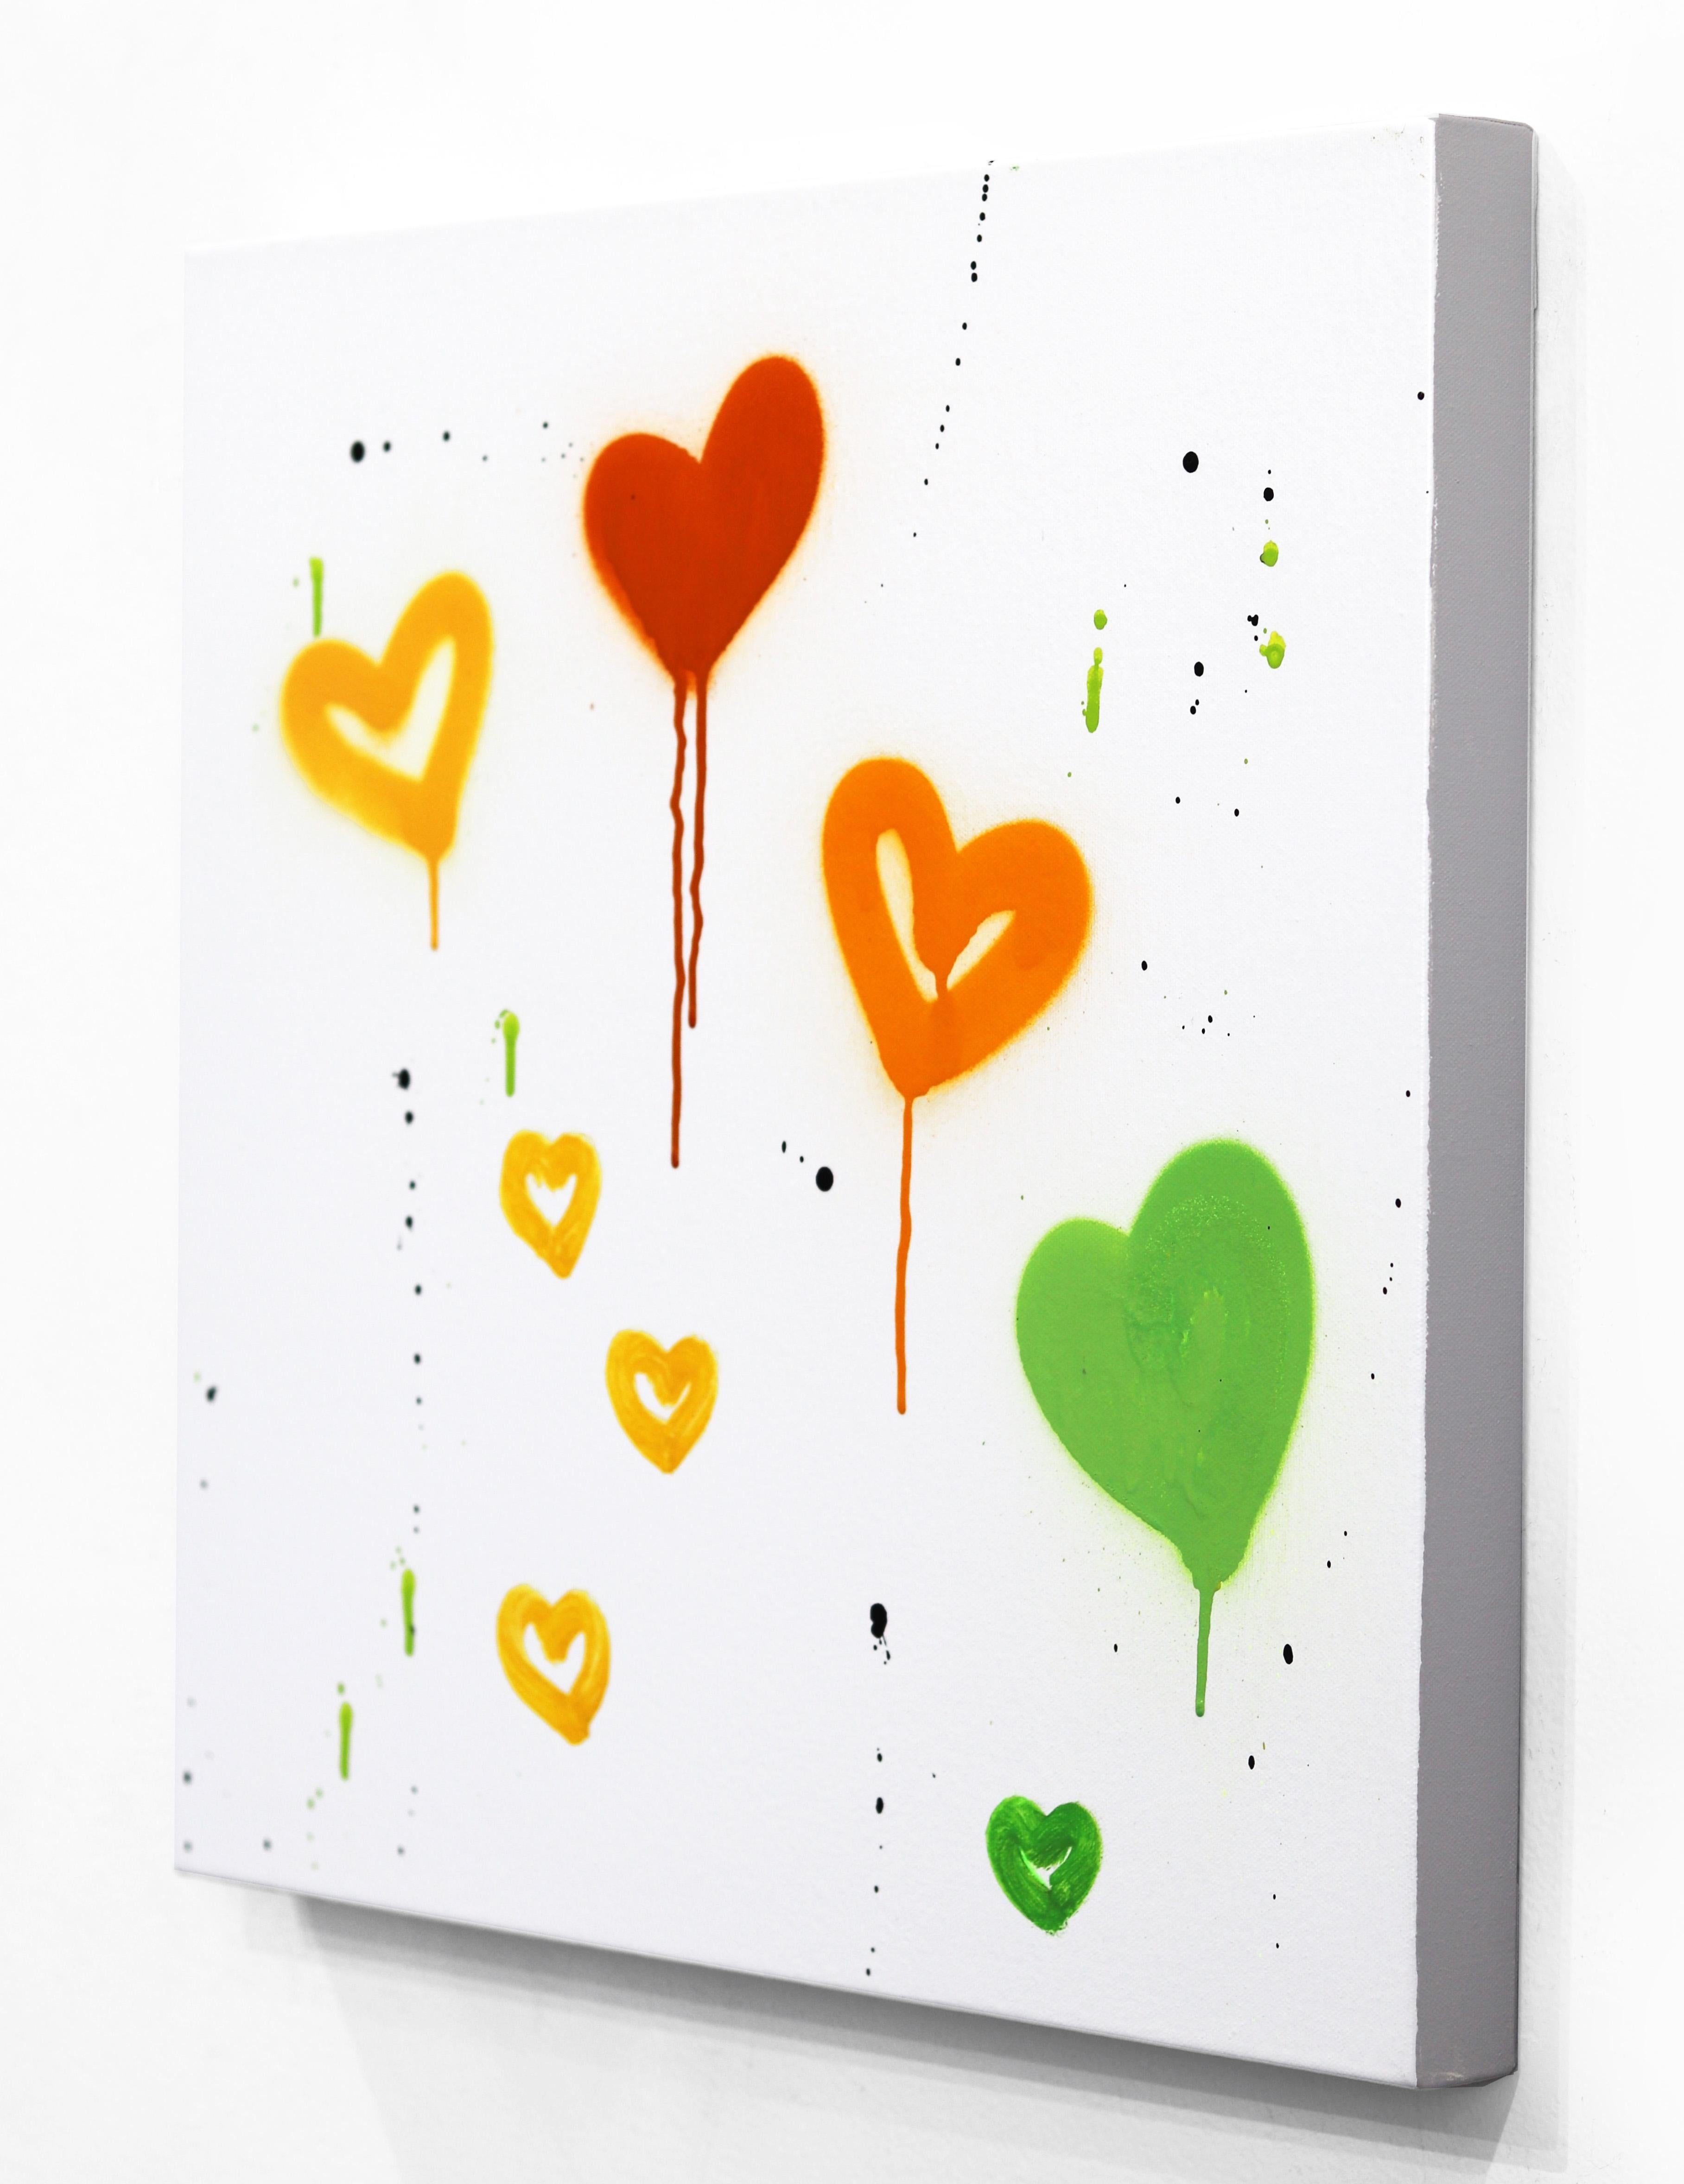 Marigolds - Colorful Hearts Original Contemporary Minimalist Love Painting For Sale 2